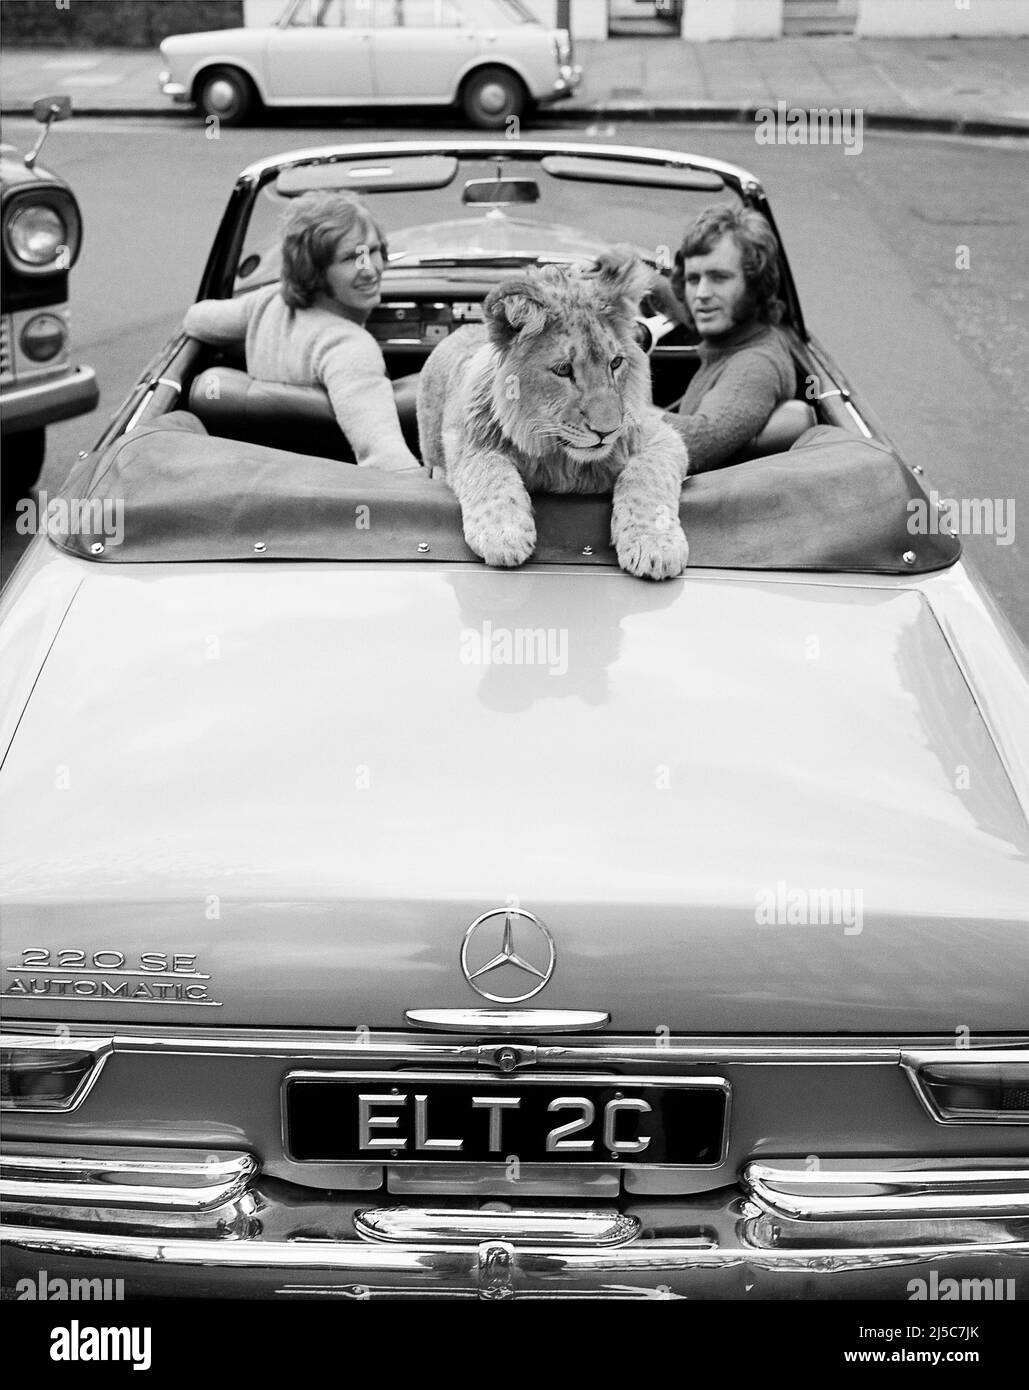 Owners Ace Bourke & John Rendall with Christian in their Mercedes car Kings Rd. Chelsea 1970 Stock Photo